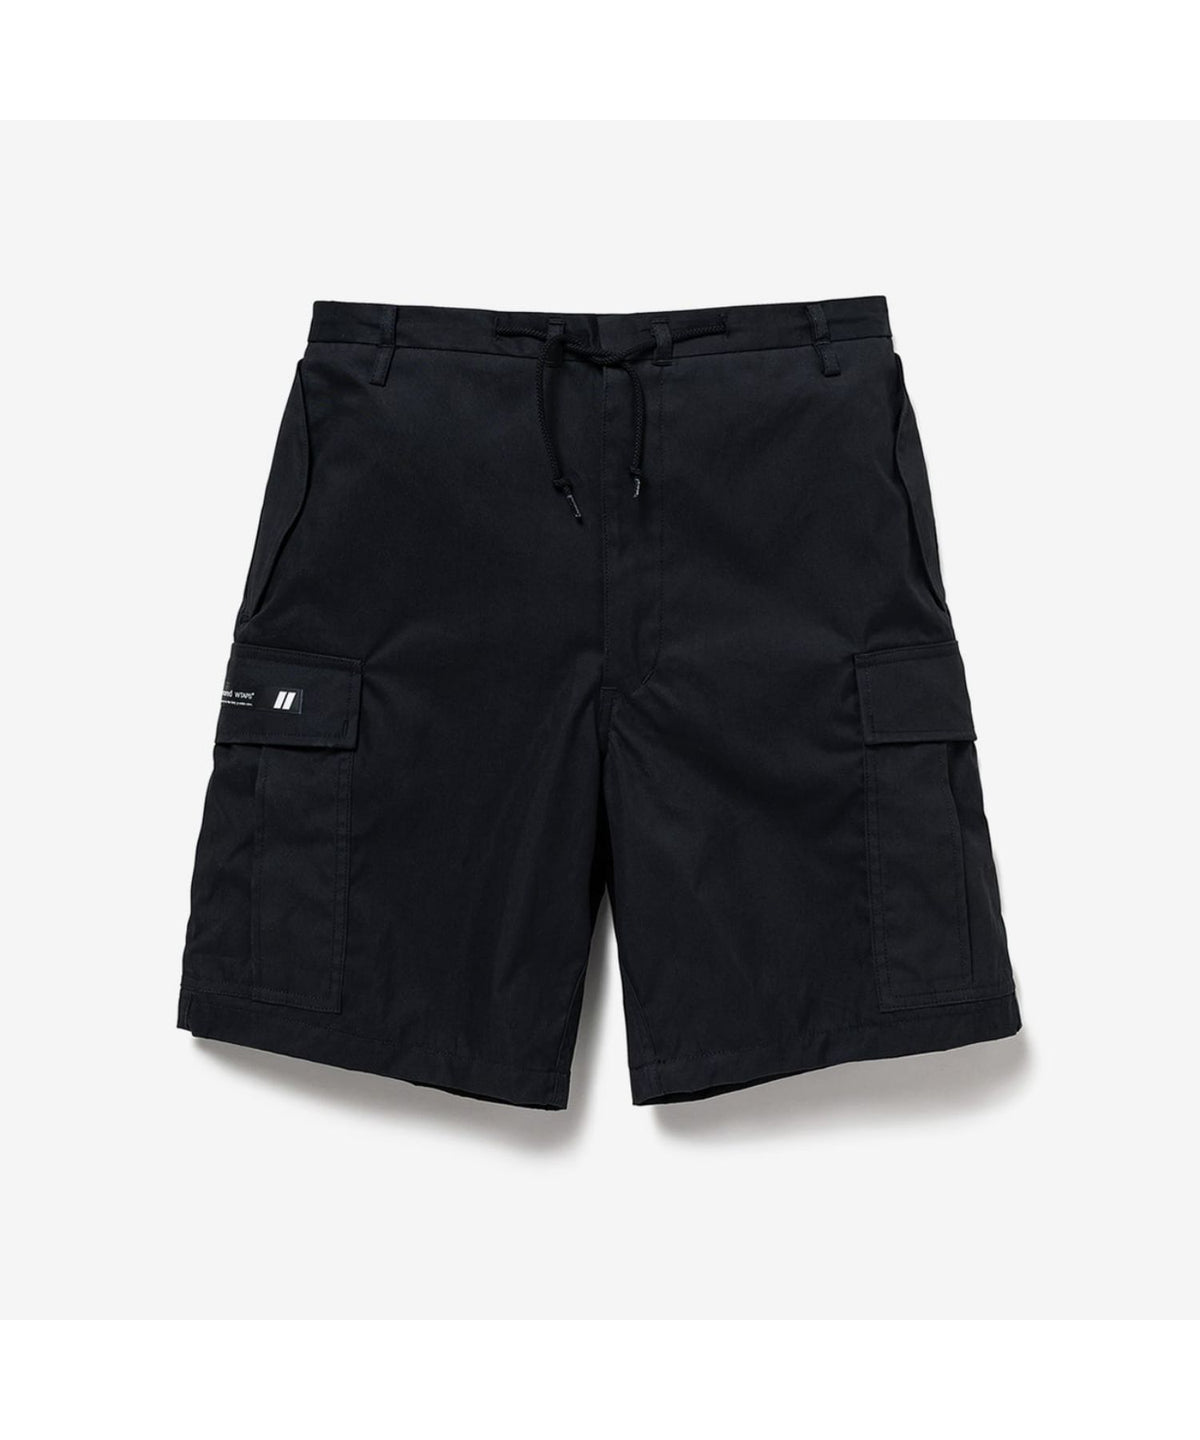 Mils0001 / Shorts / Nyco. Oxford